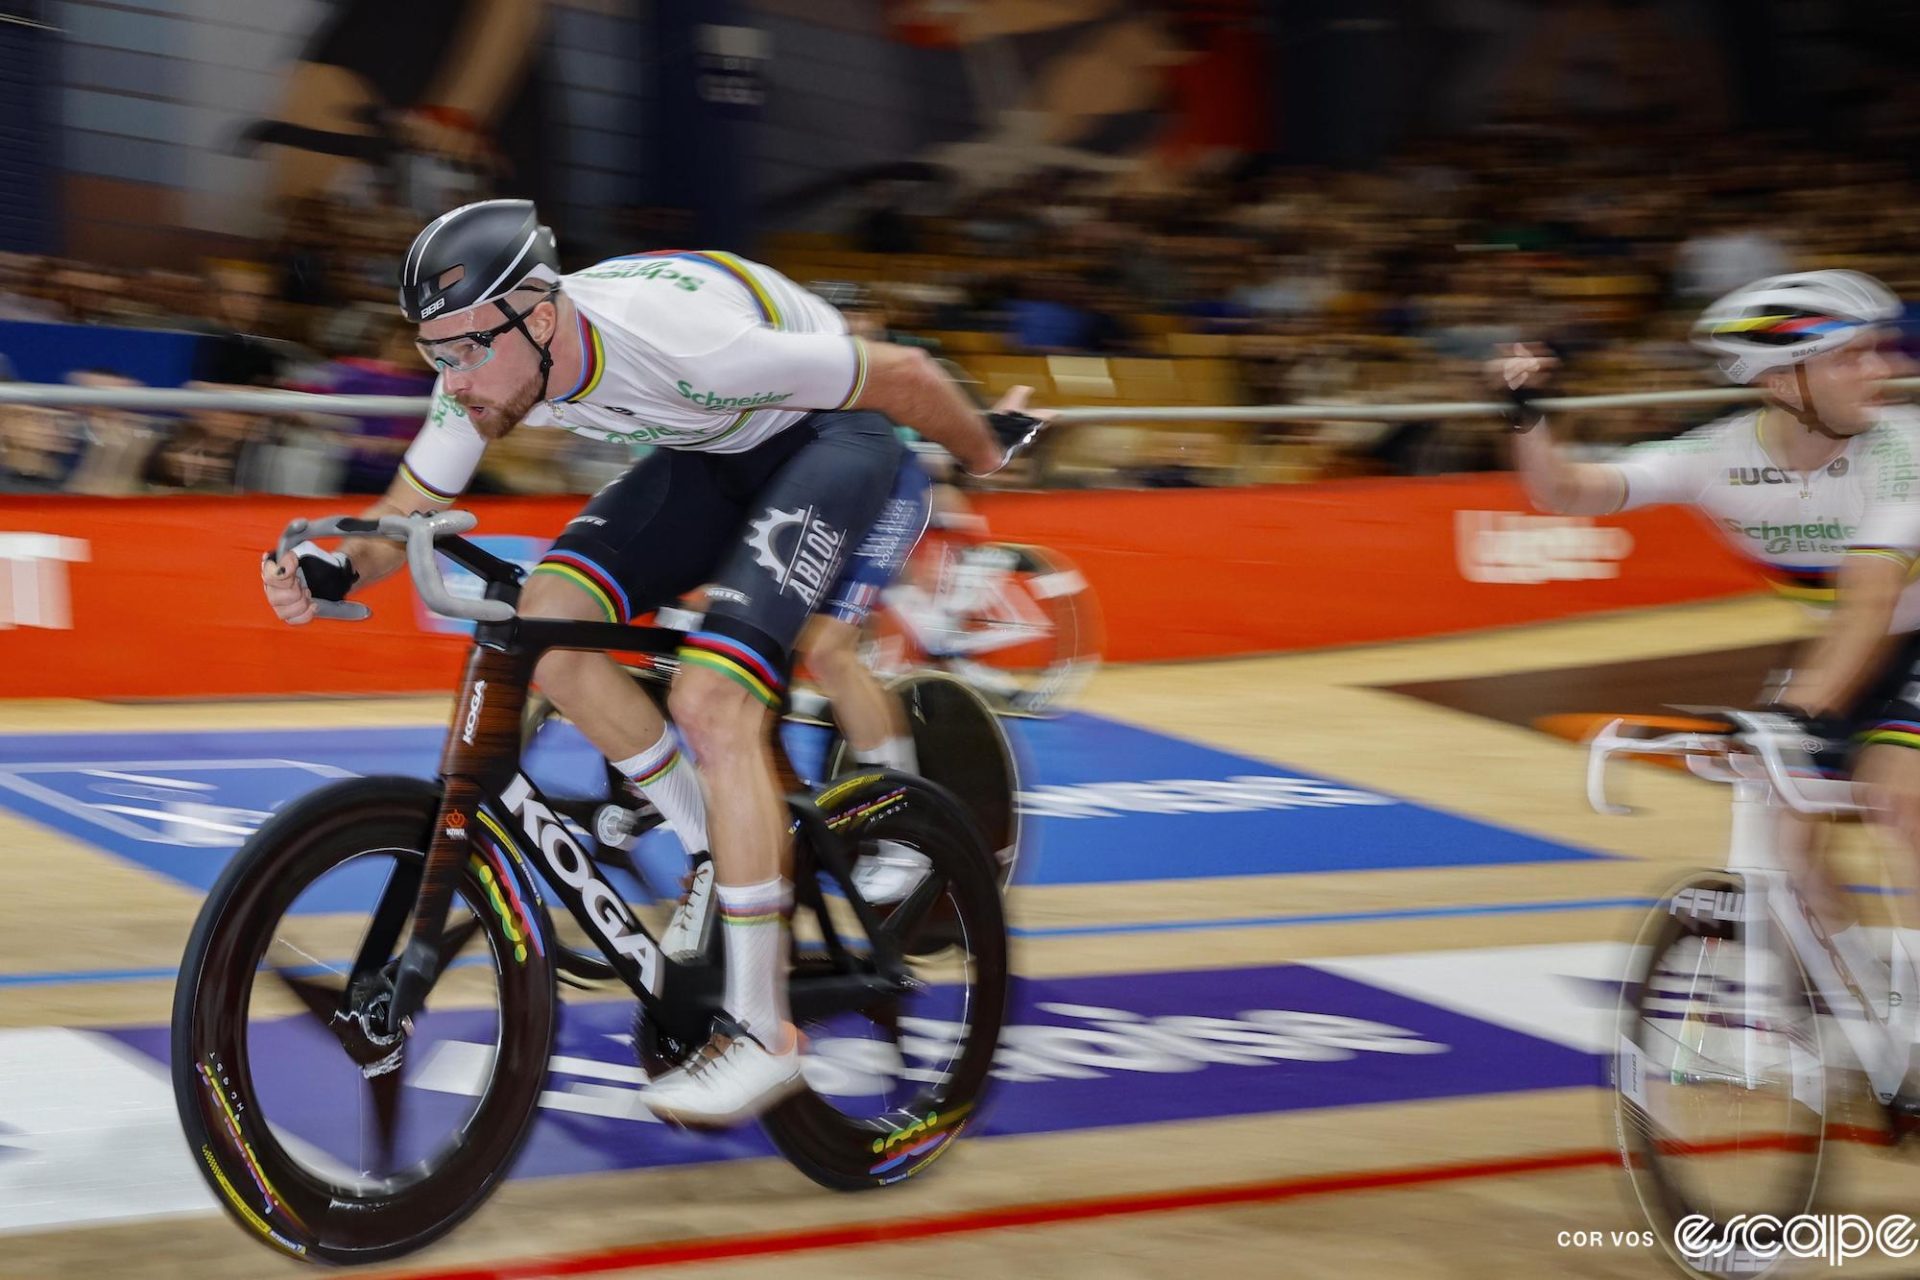 Jan-Willem van Schip releases a handsling from teammate Yoeri Havik. Both are in a blur of speed - Van Schip focused on the track ahead as Havik looks over his shoulder to his left to exit the track.